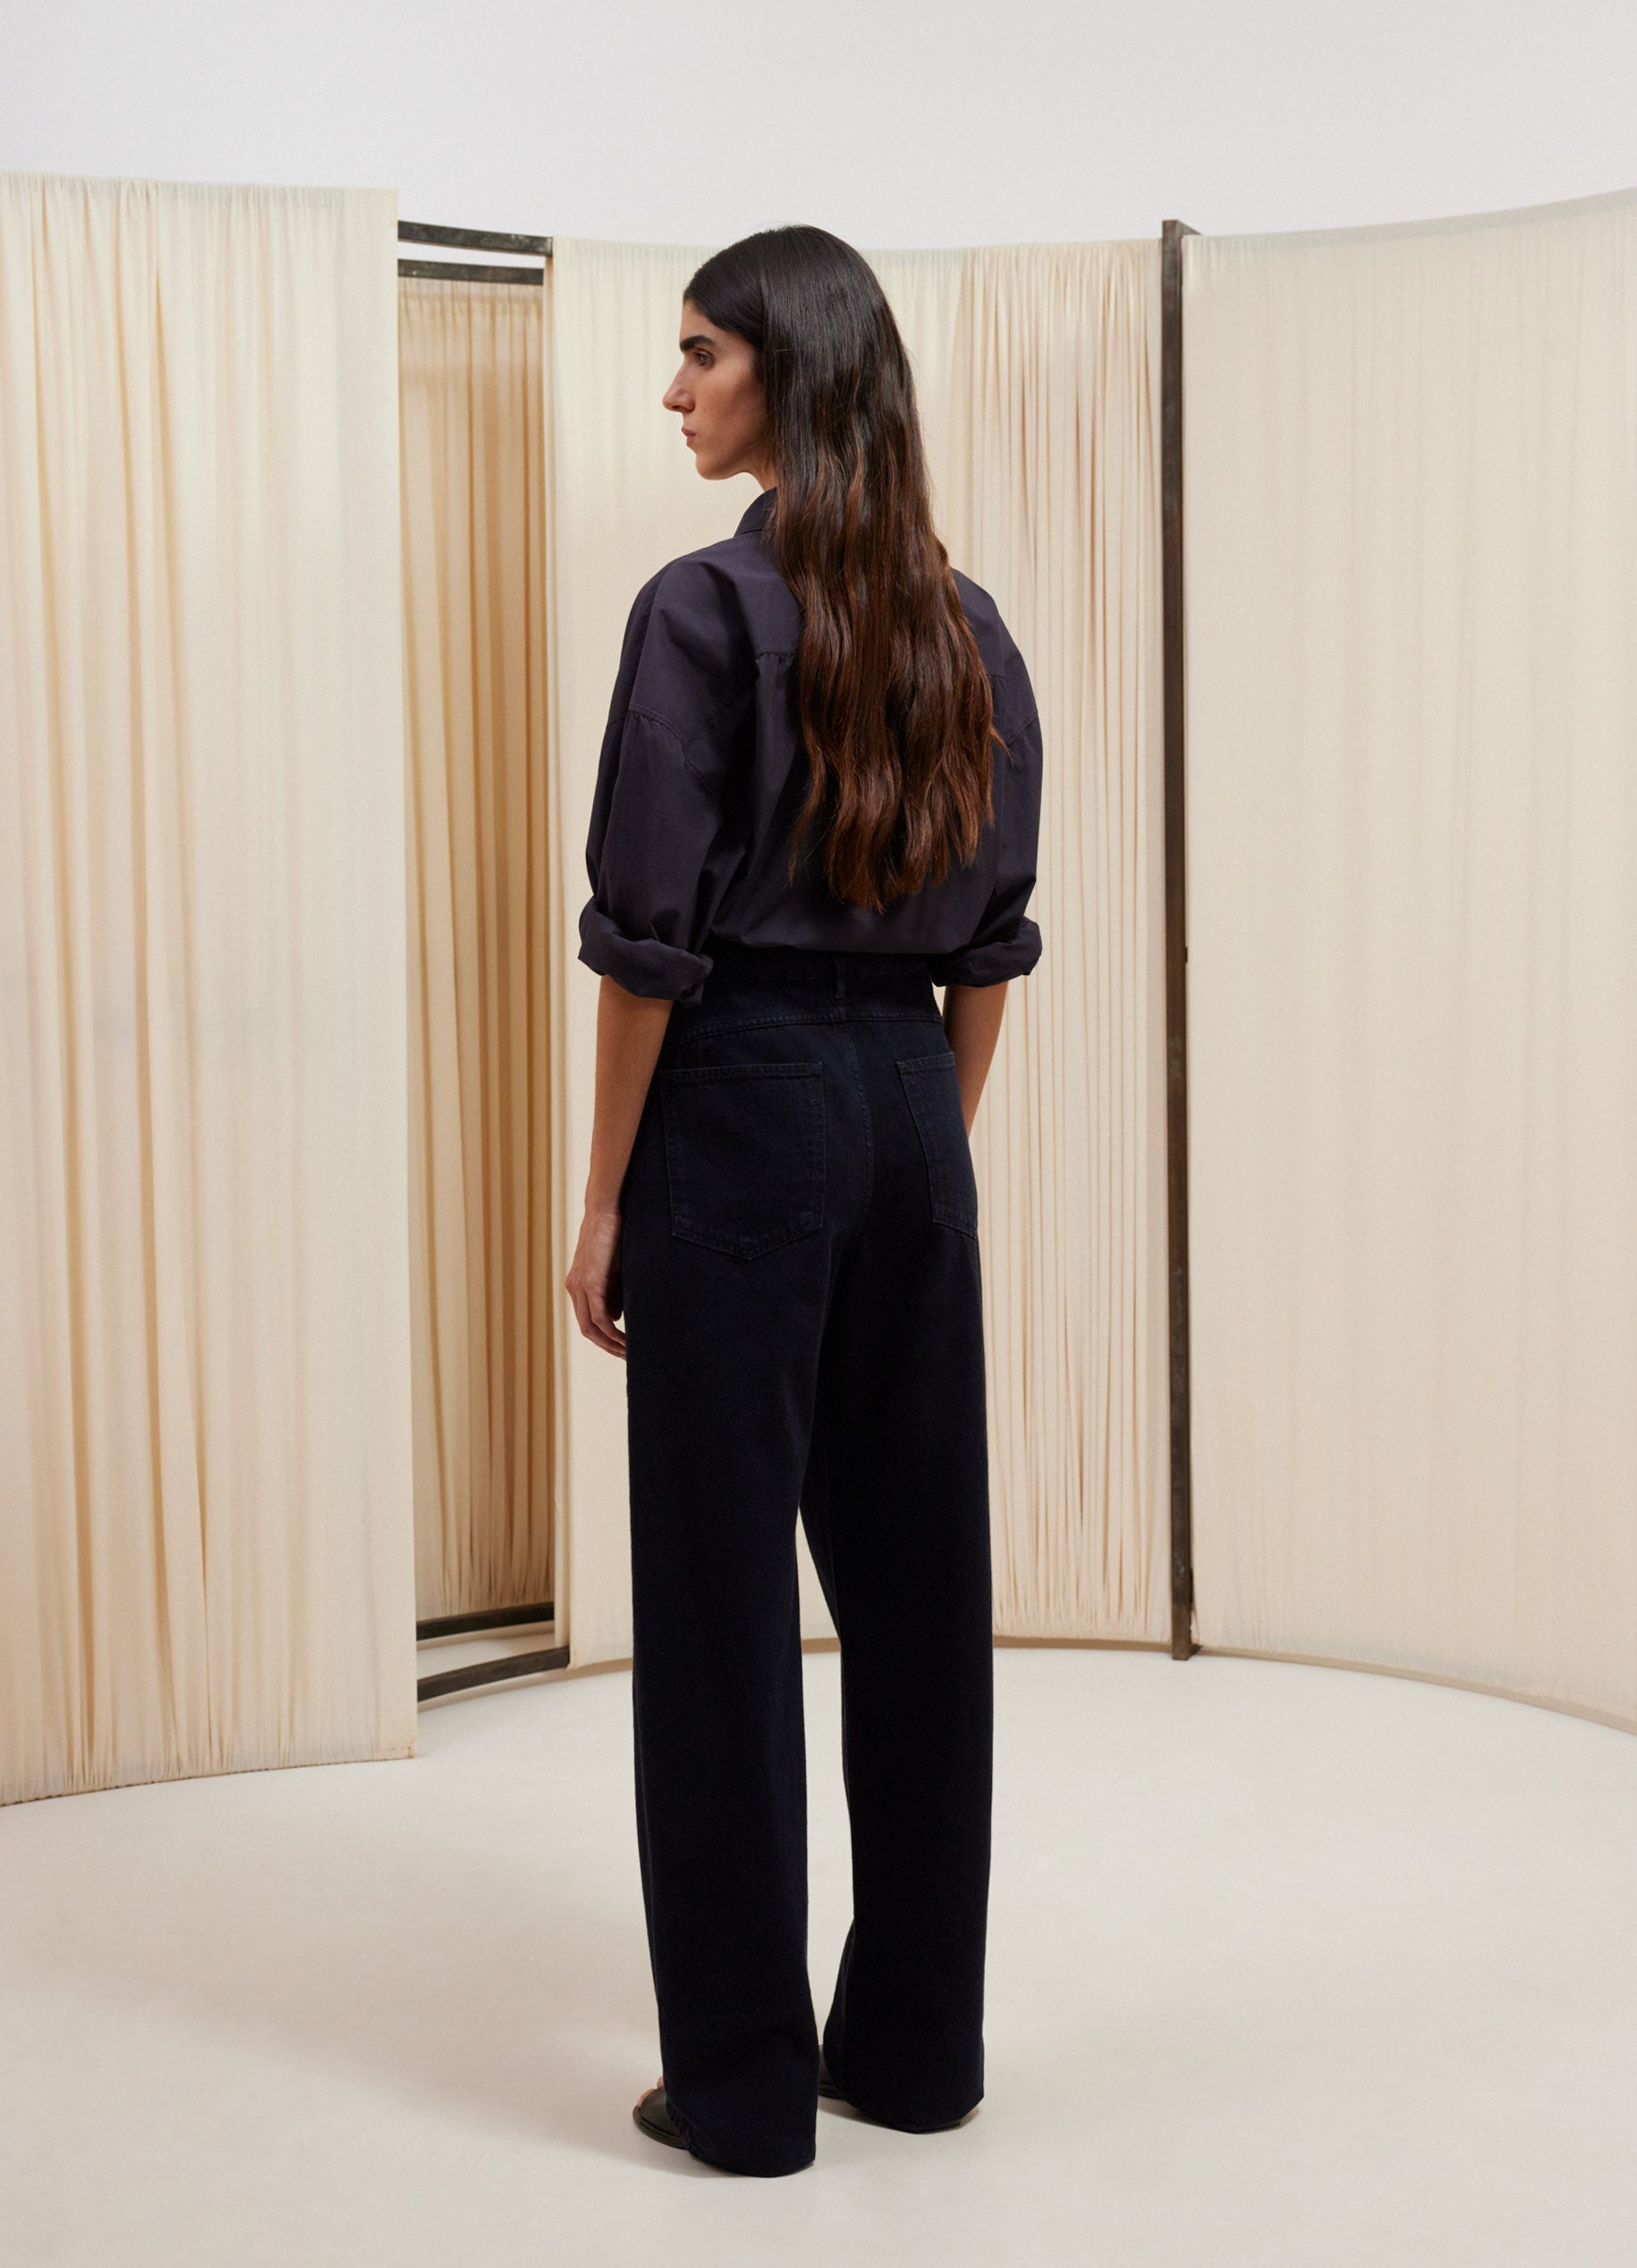 Aubergine Wide Leg Pants in Wr Tumbled Cotton | LEMAIRE